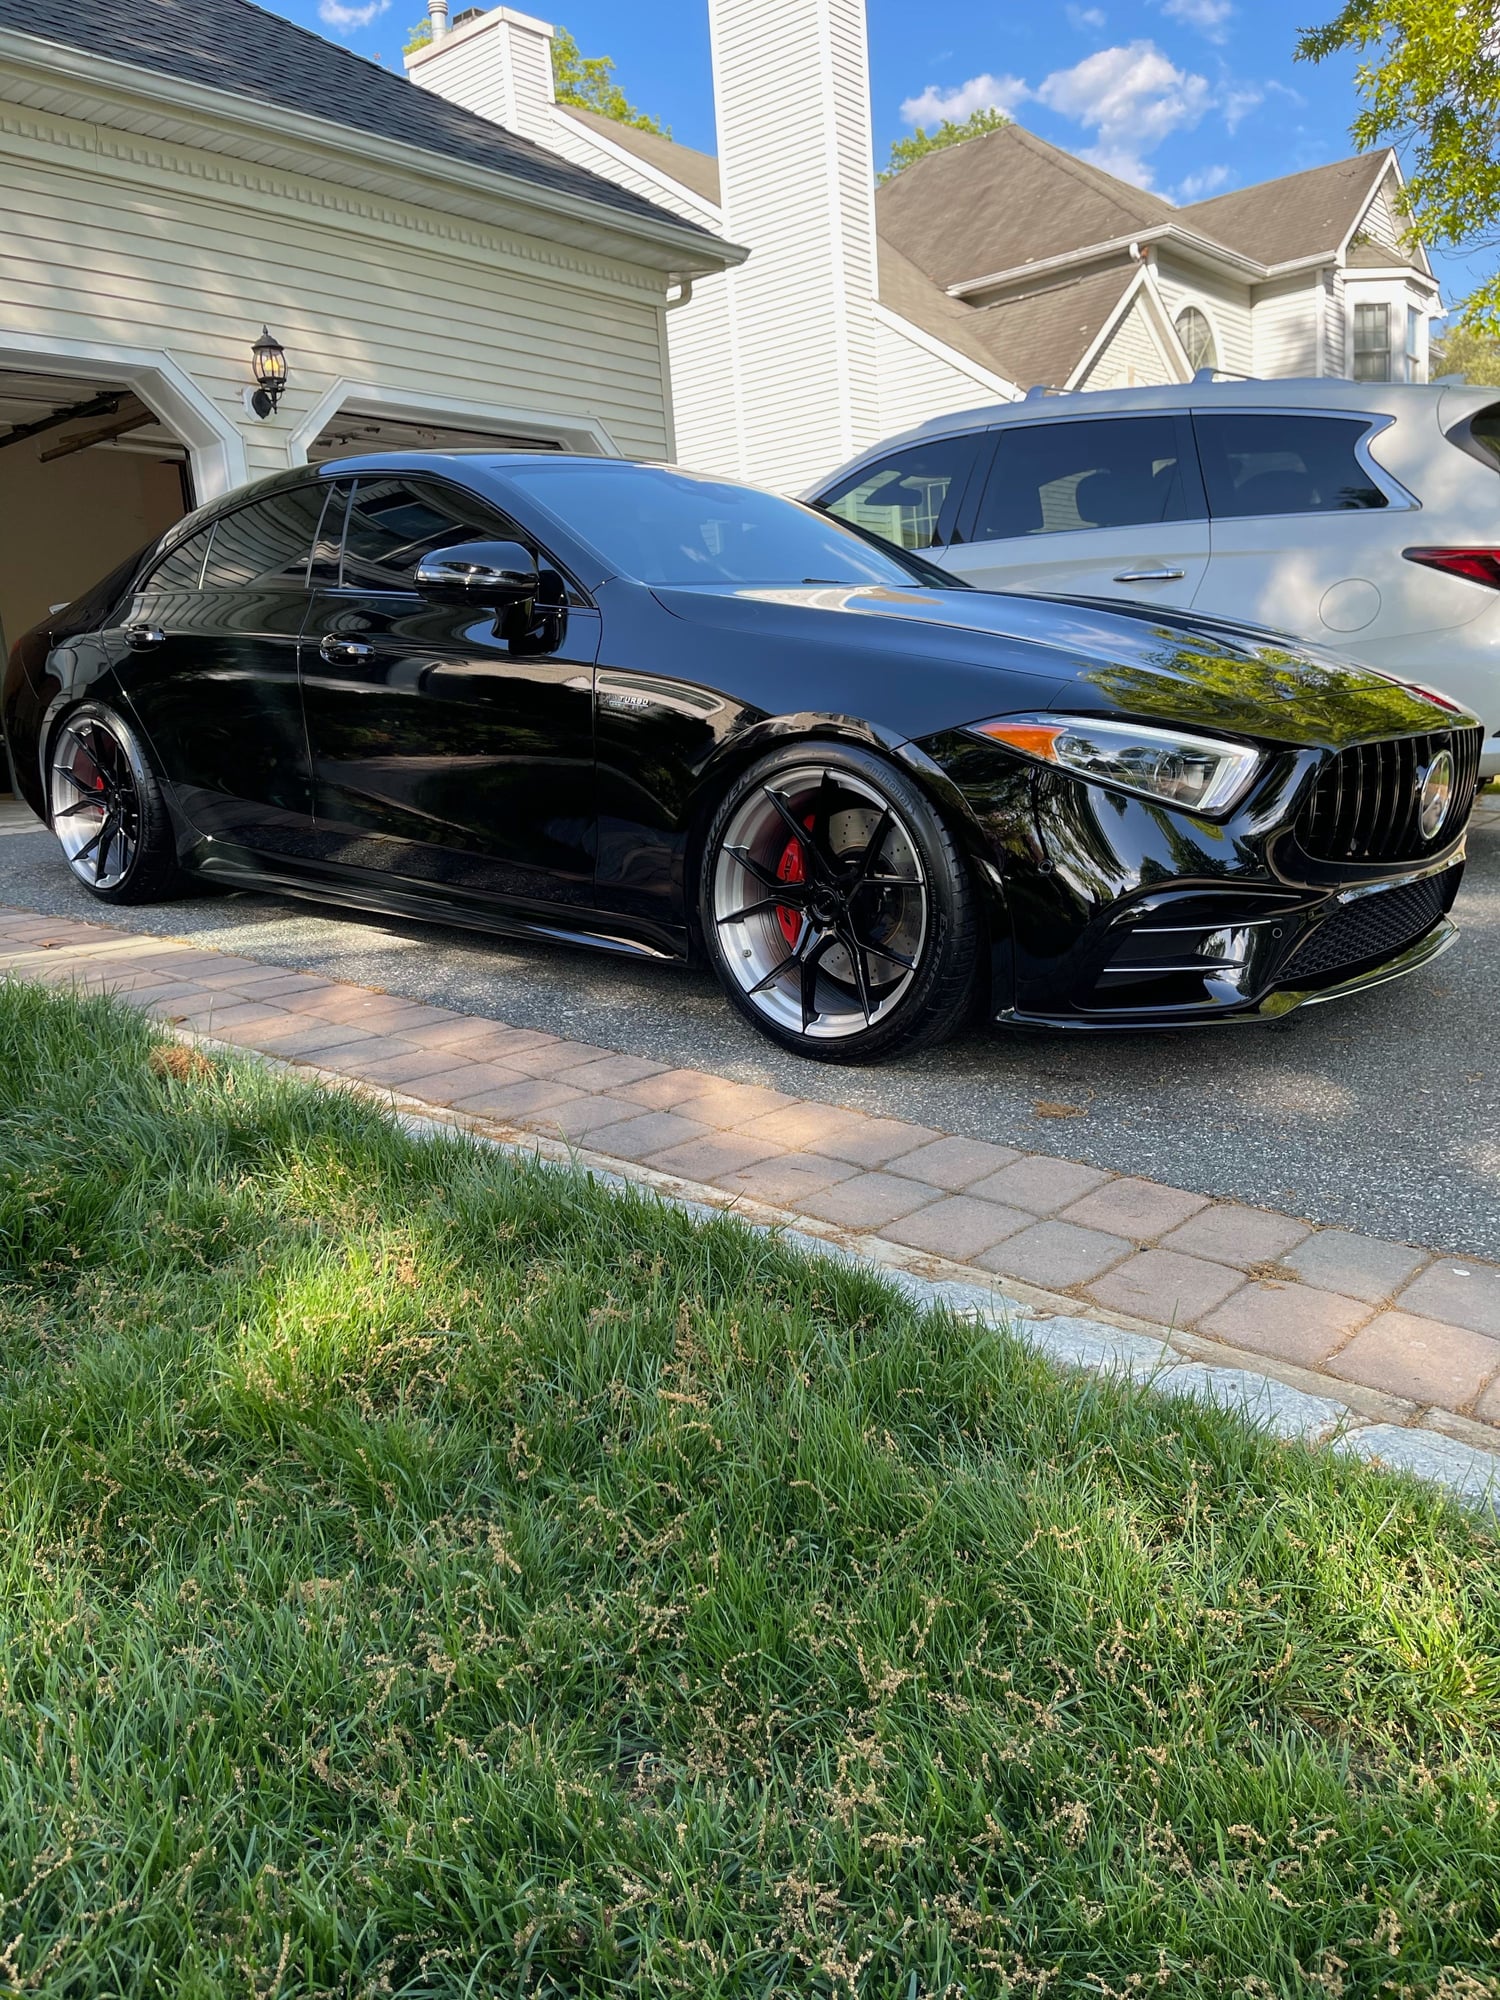 Wheels and Tires/Axles - 20" Stance SF07 wheels/tires custom CLS53 - Used - 2019 to 2022 Mercedes-Benz CLS53 AMG - East Hanover, NJ 07936, United States